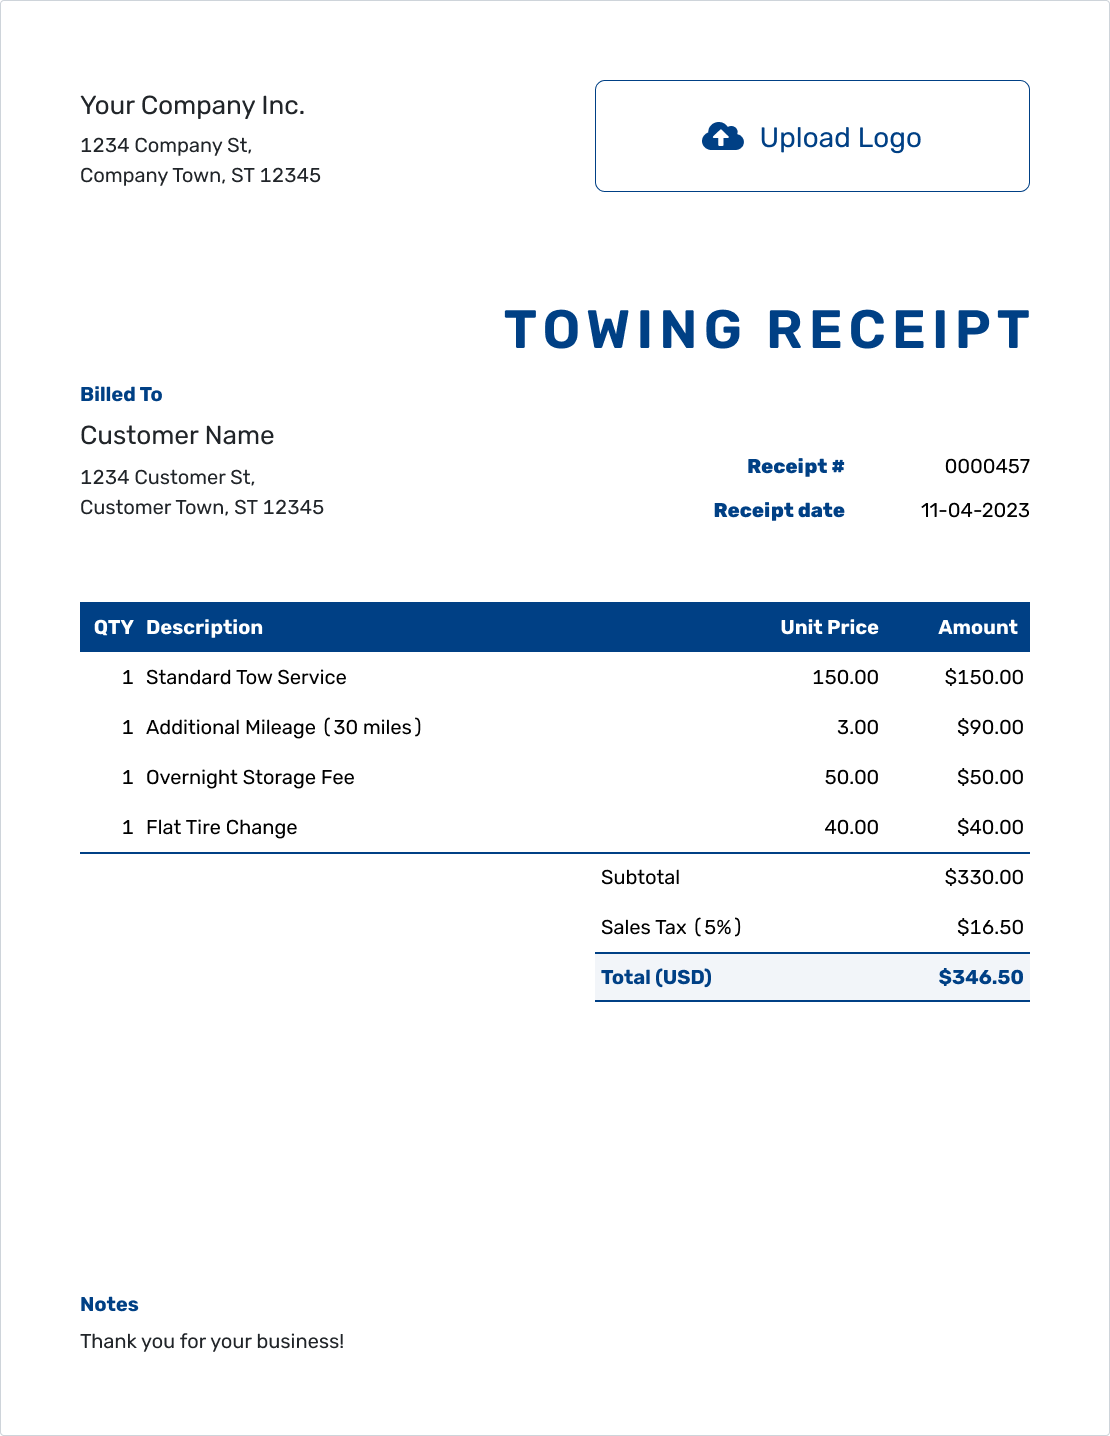 Sample Towing Receipt Template